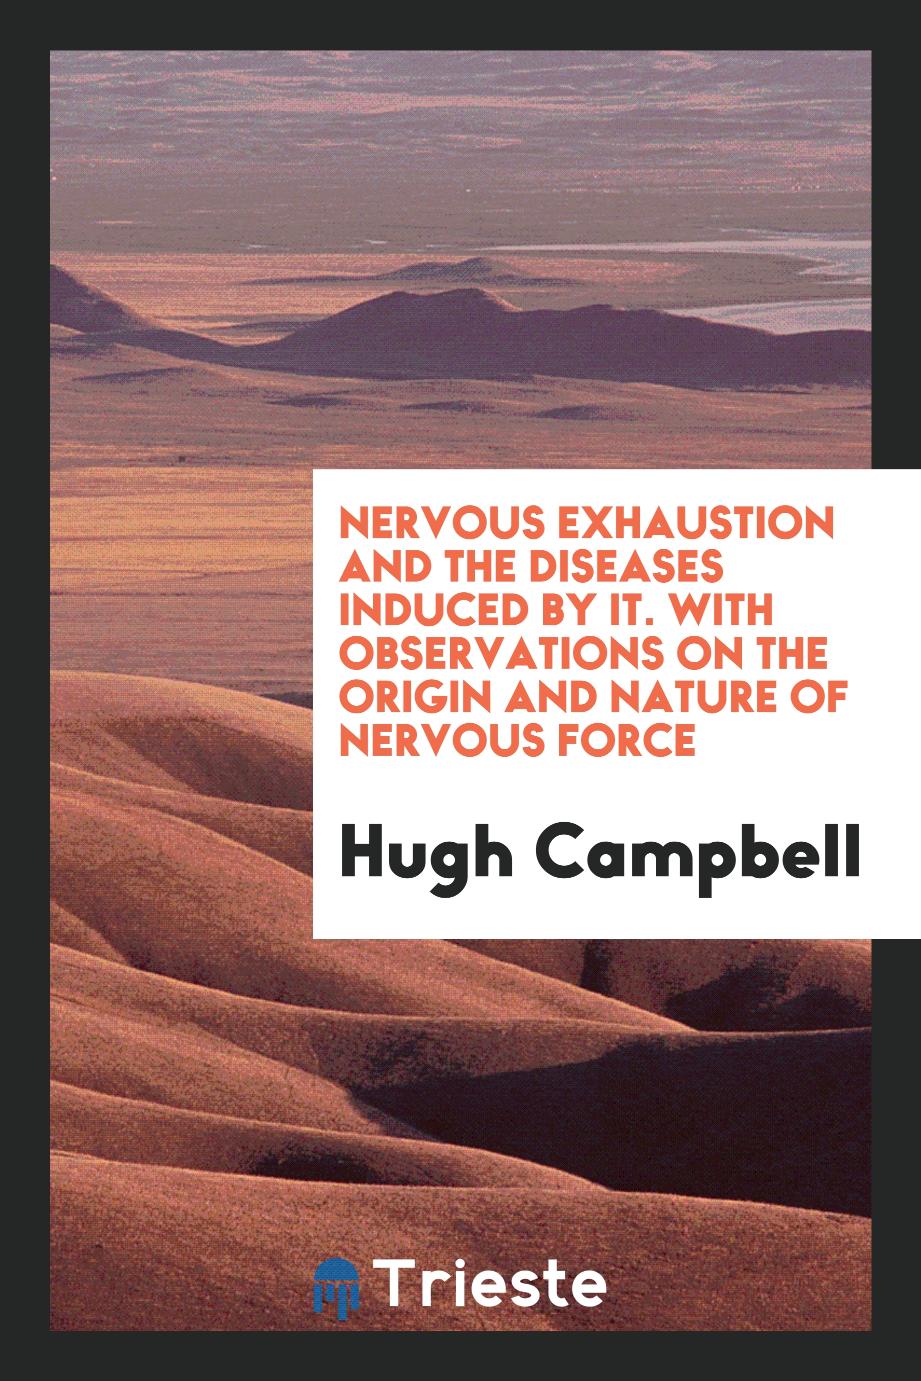 Nervous Exhaustion and the Diseases Induced by It. With Observations on the Origin and Nature of Nervous Force